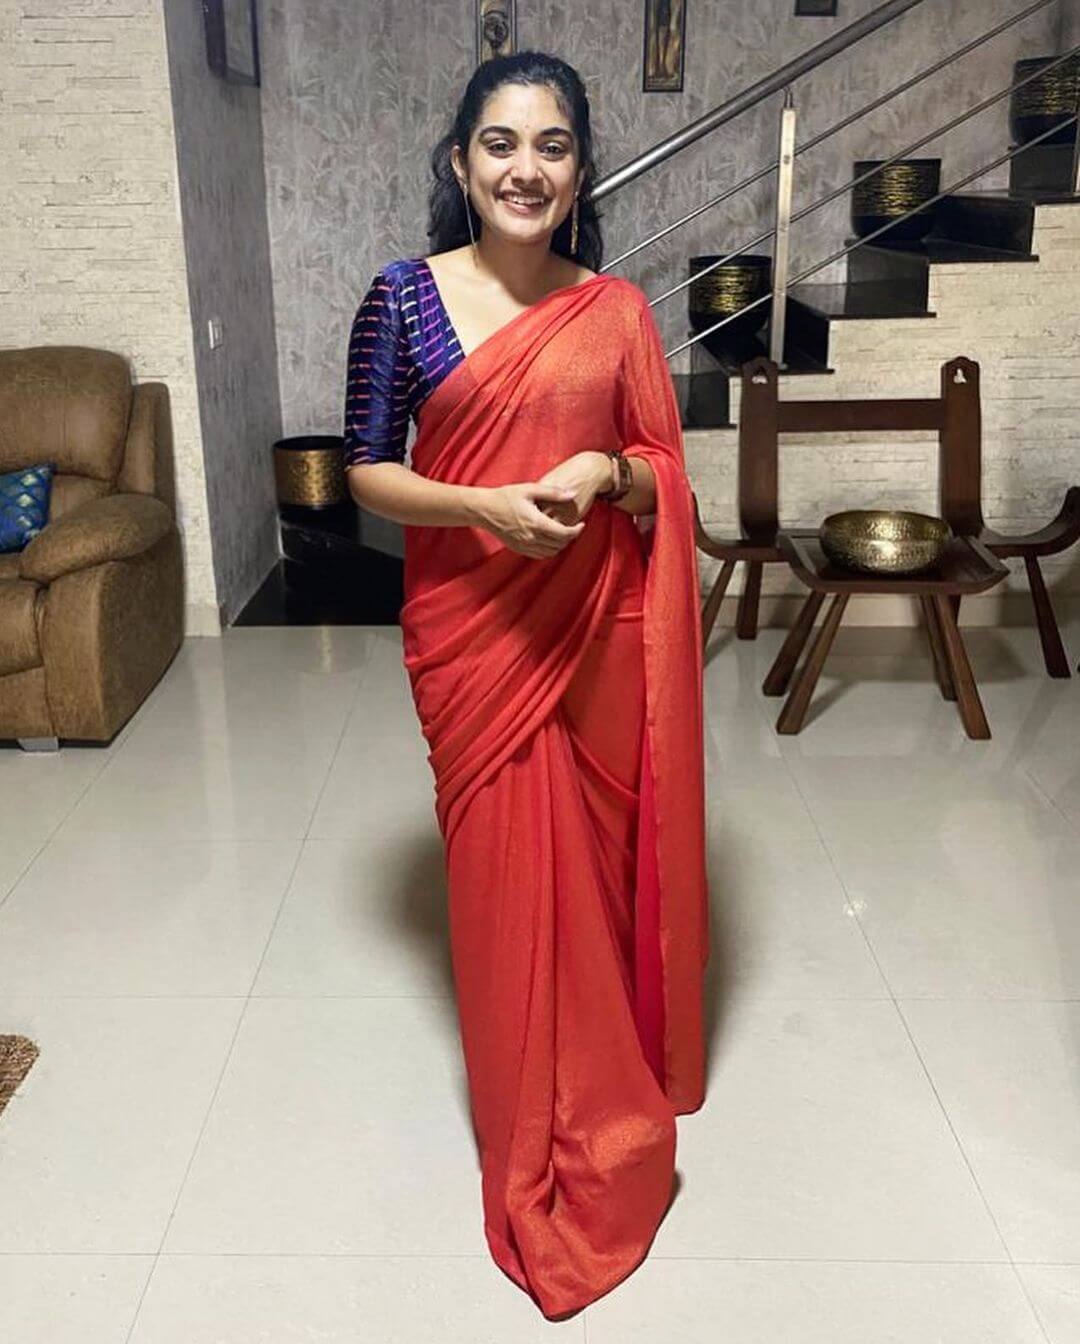 Nivetha Thomas Look Gorgeous In Red Saree With Blue Contrasting Blouse Nivetha Thomas Elegant Looks &amp; Outfit